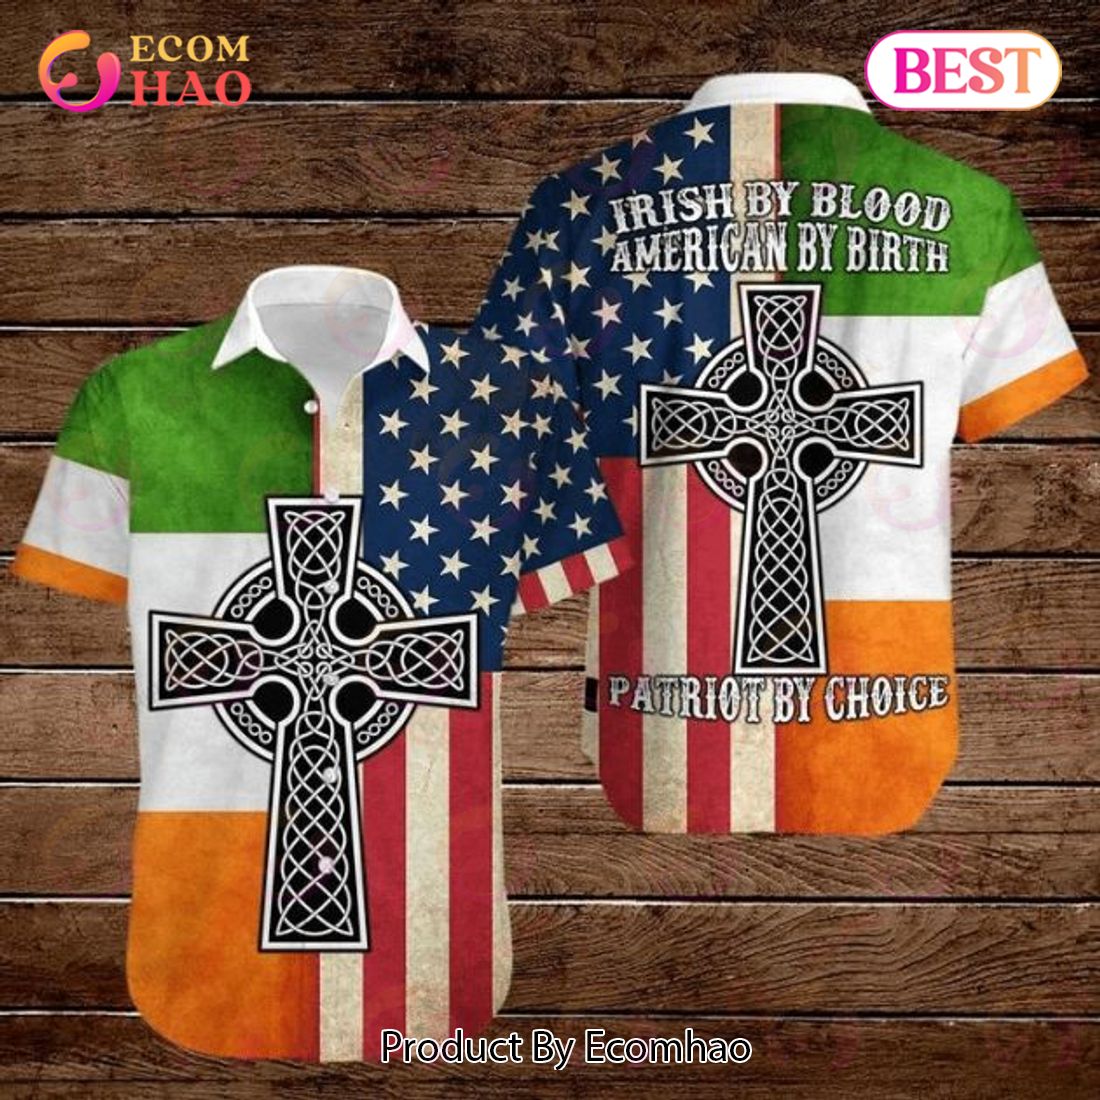 Celtic Cross 4th Of July Independence Day Irish By Blood Patriot By Choice Hawaiian Shirt